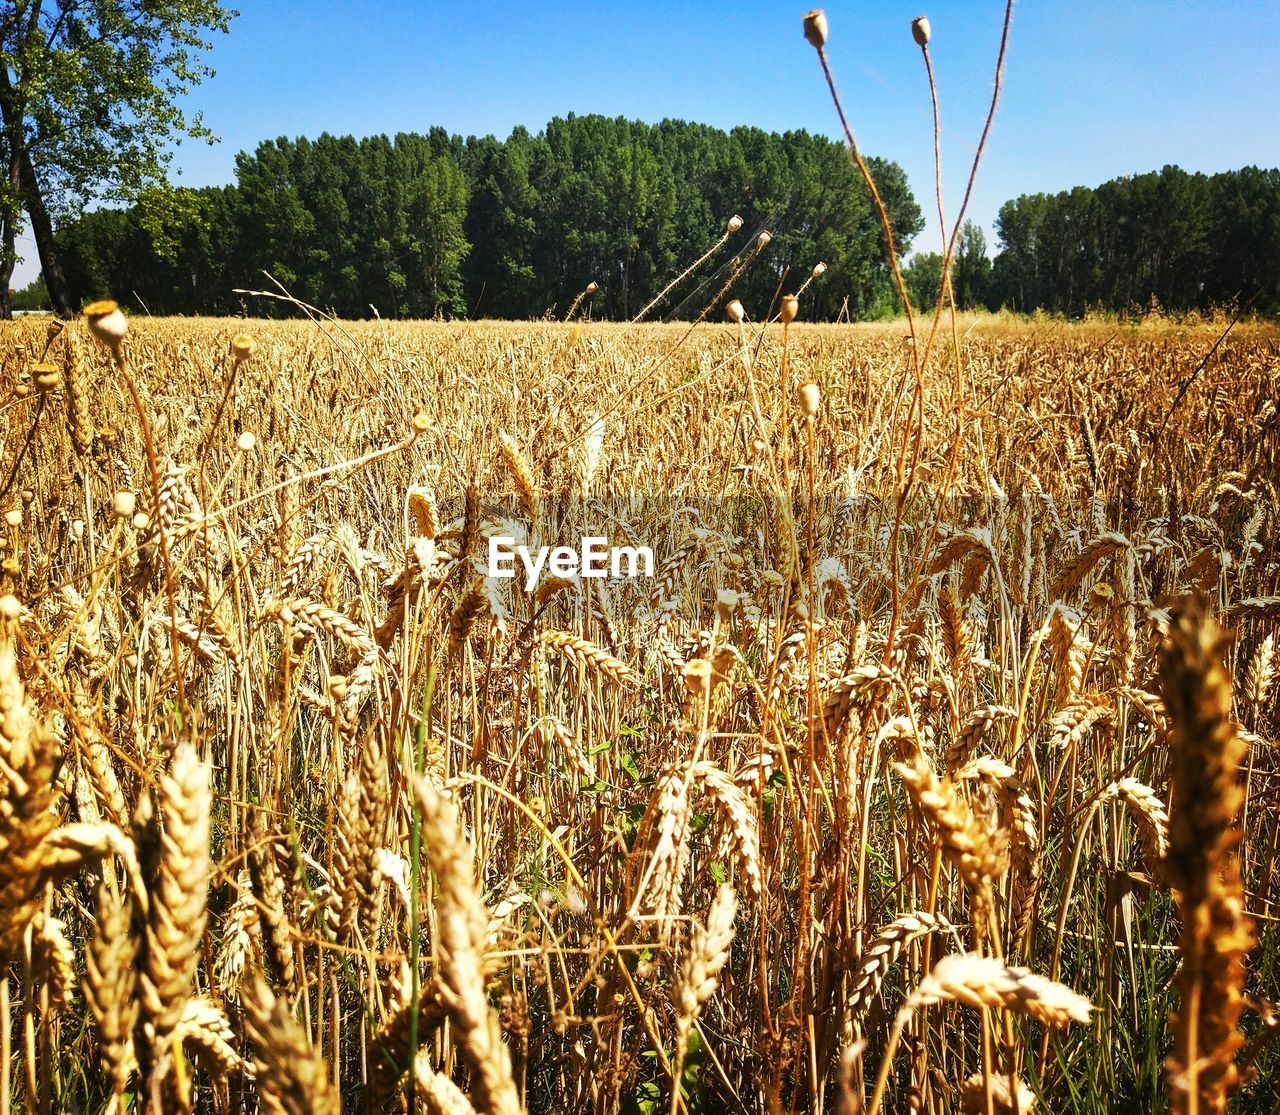 VIEW OF WHEAT FIELD AGAINST CLEAR SKY